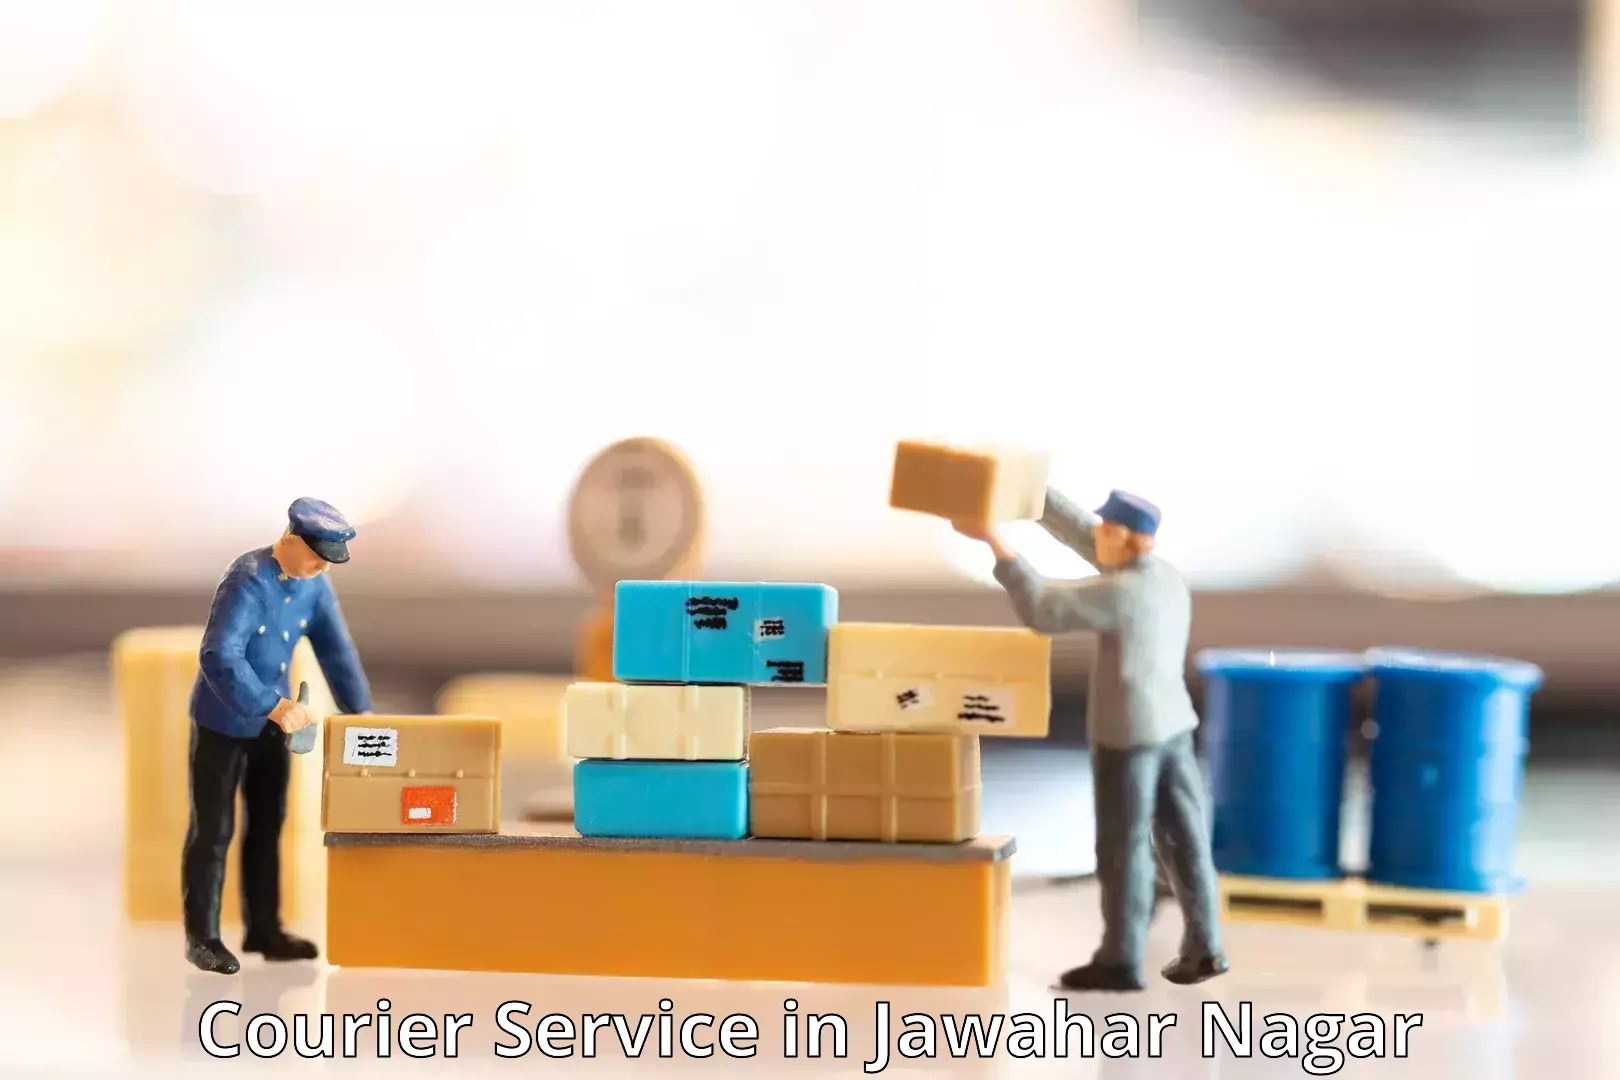 Automated parcel services in Jawahar Nagar